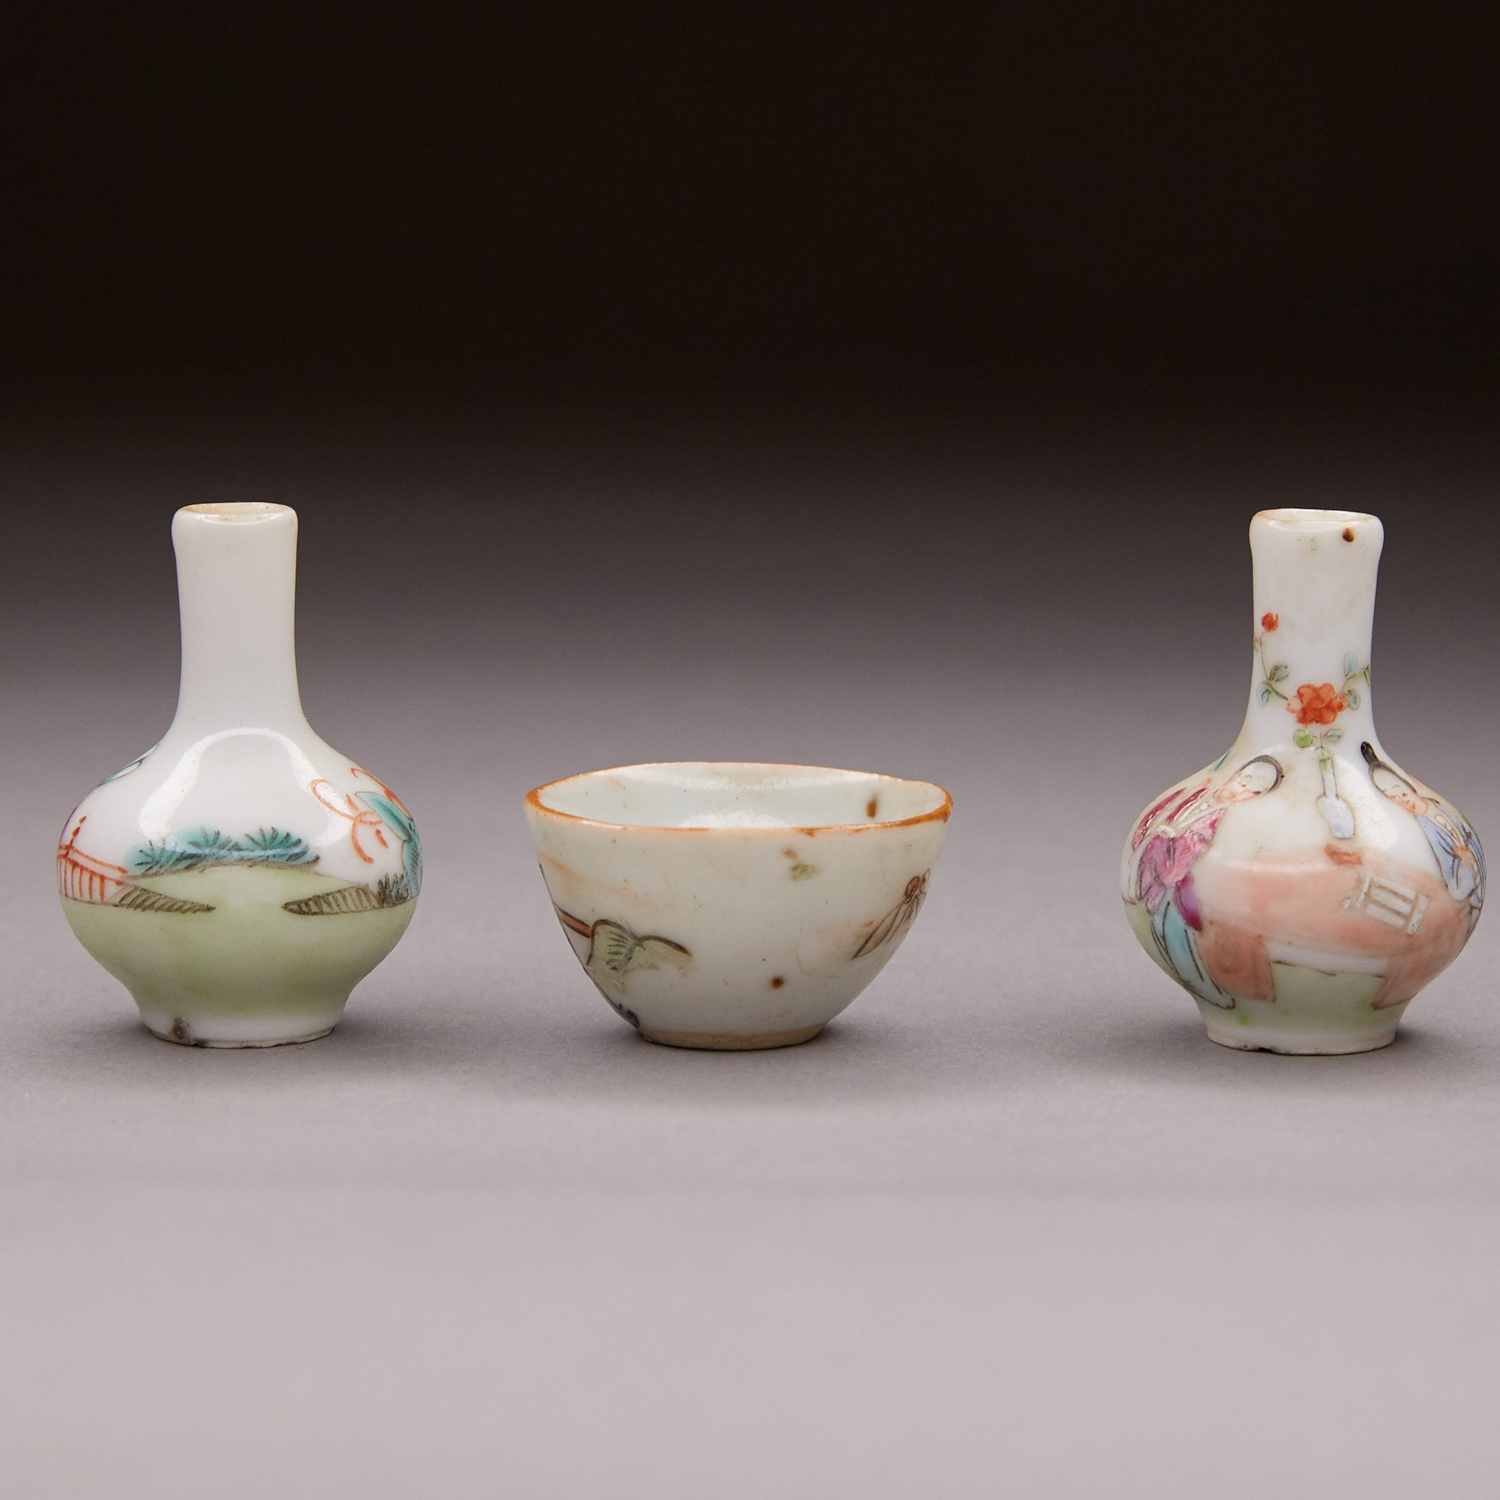 Grp:3 Late Qing Chinese Miniature Porcelain Objects - Image 2 of 4